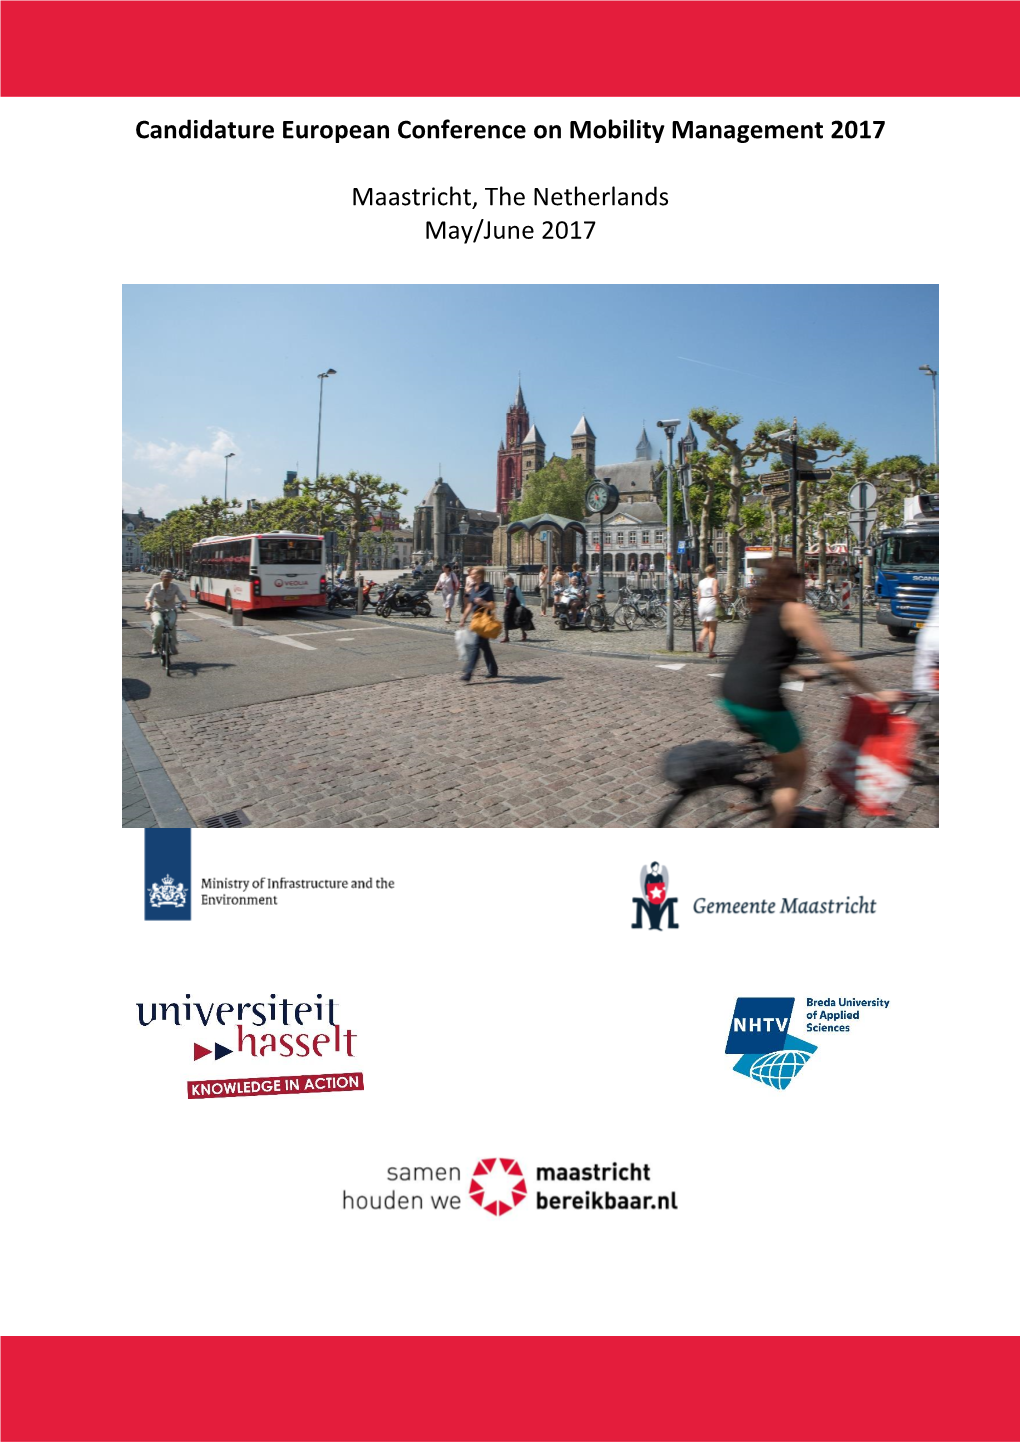 Candidature European Conference on Mobility Management 2017 Maastricht, the Netherlands May/June 2017